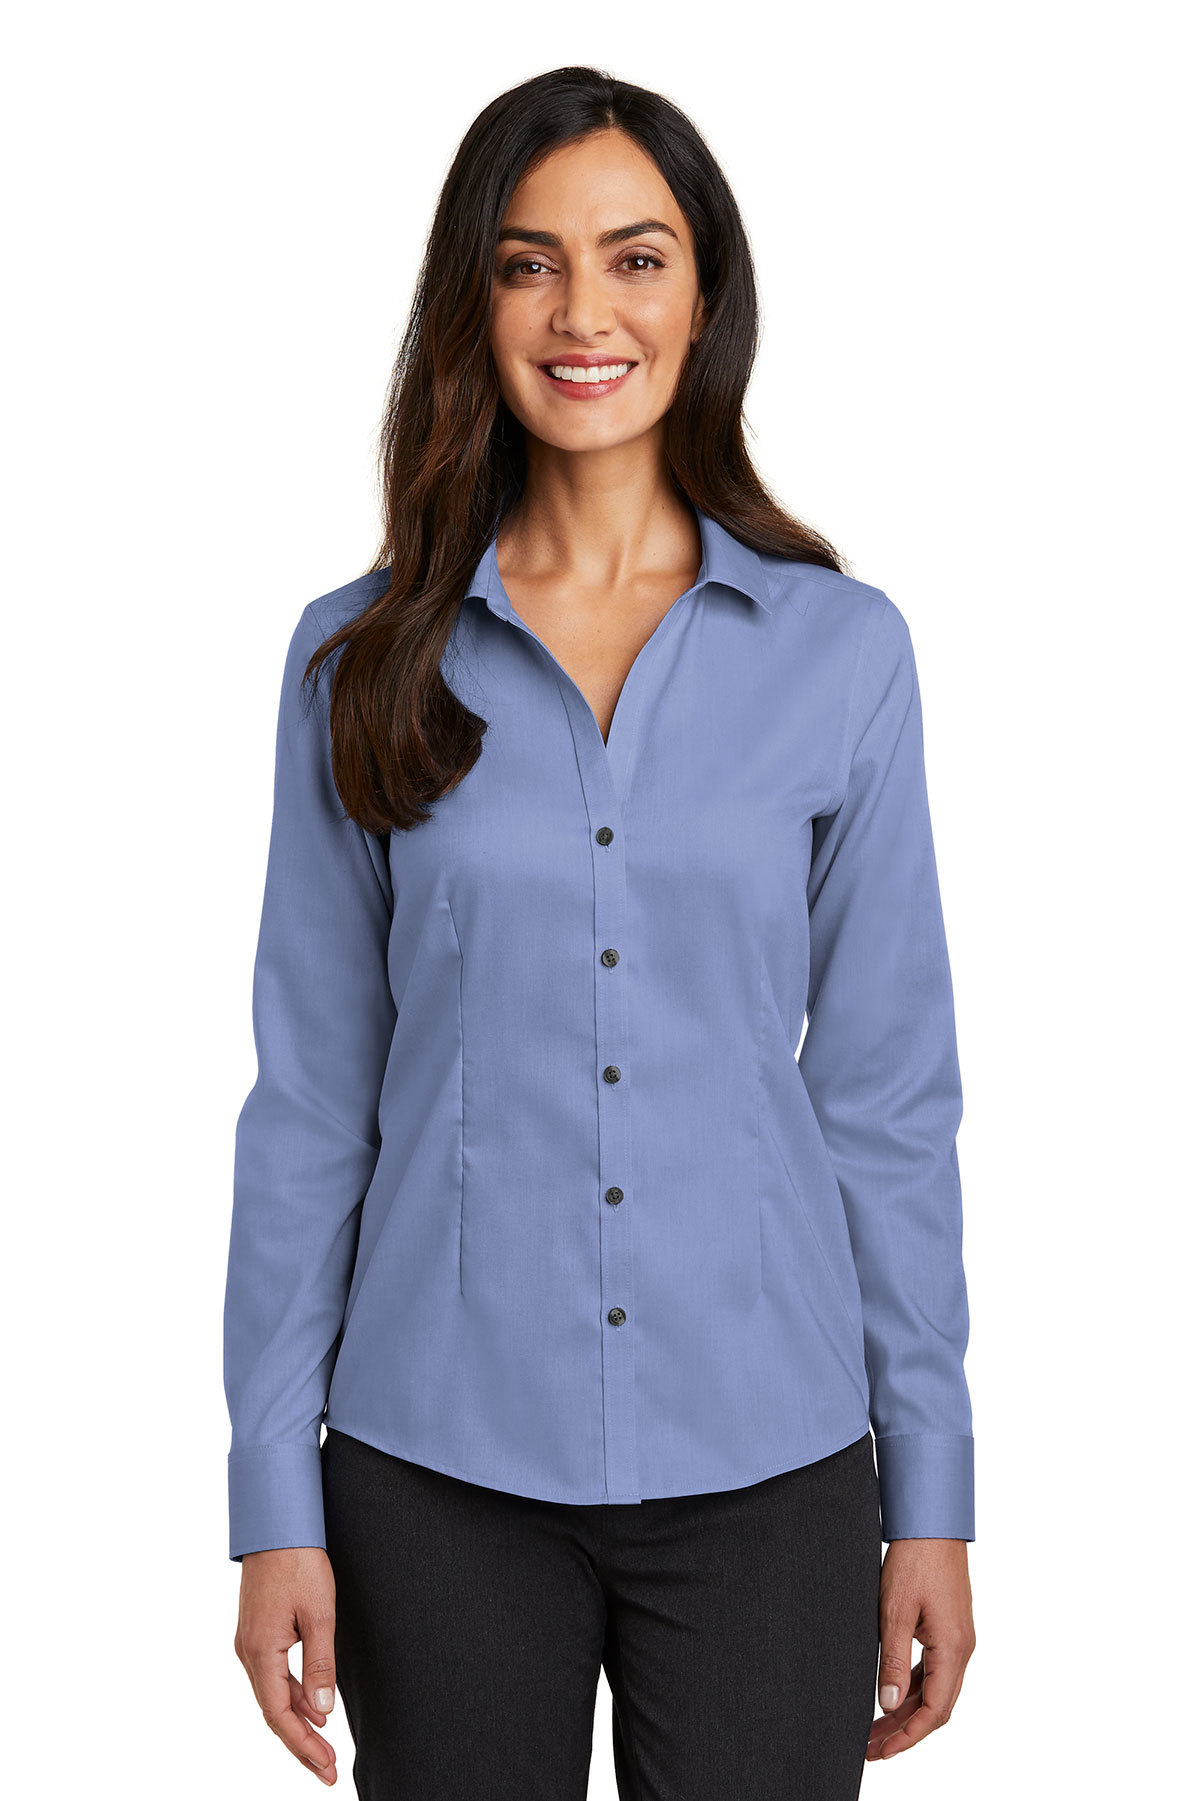 RH250 Red House® Ladies Pinpoint Oxford Non-Iron Shirt